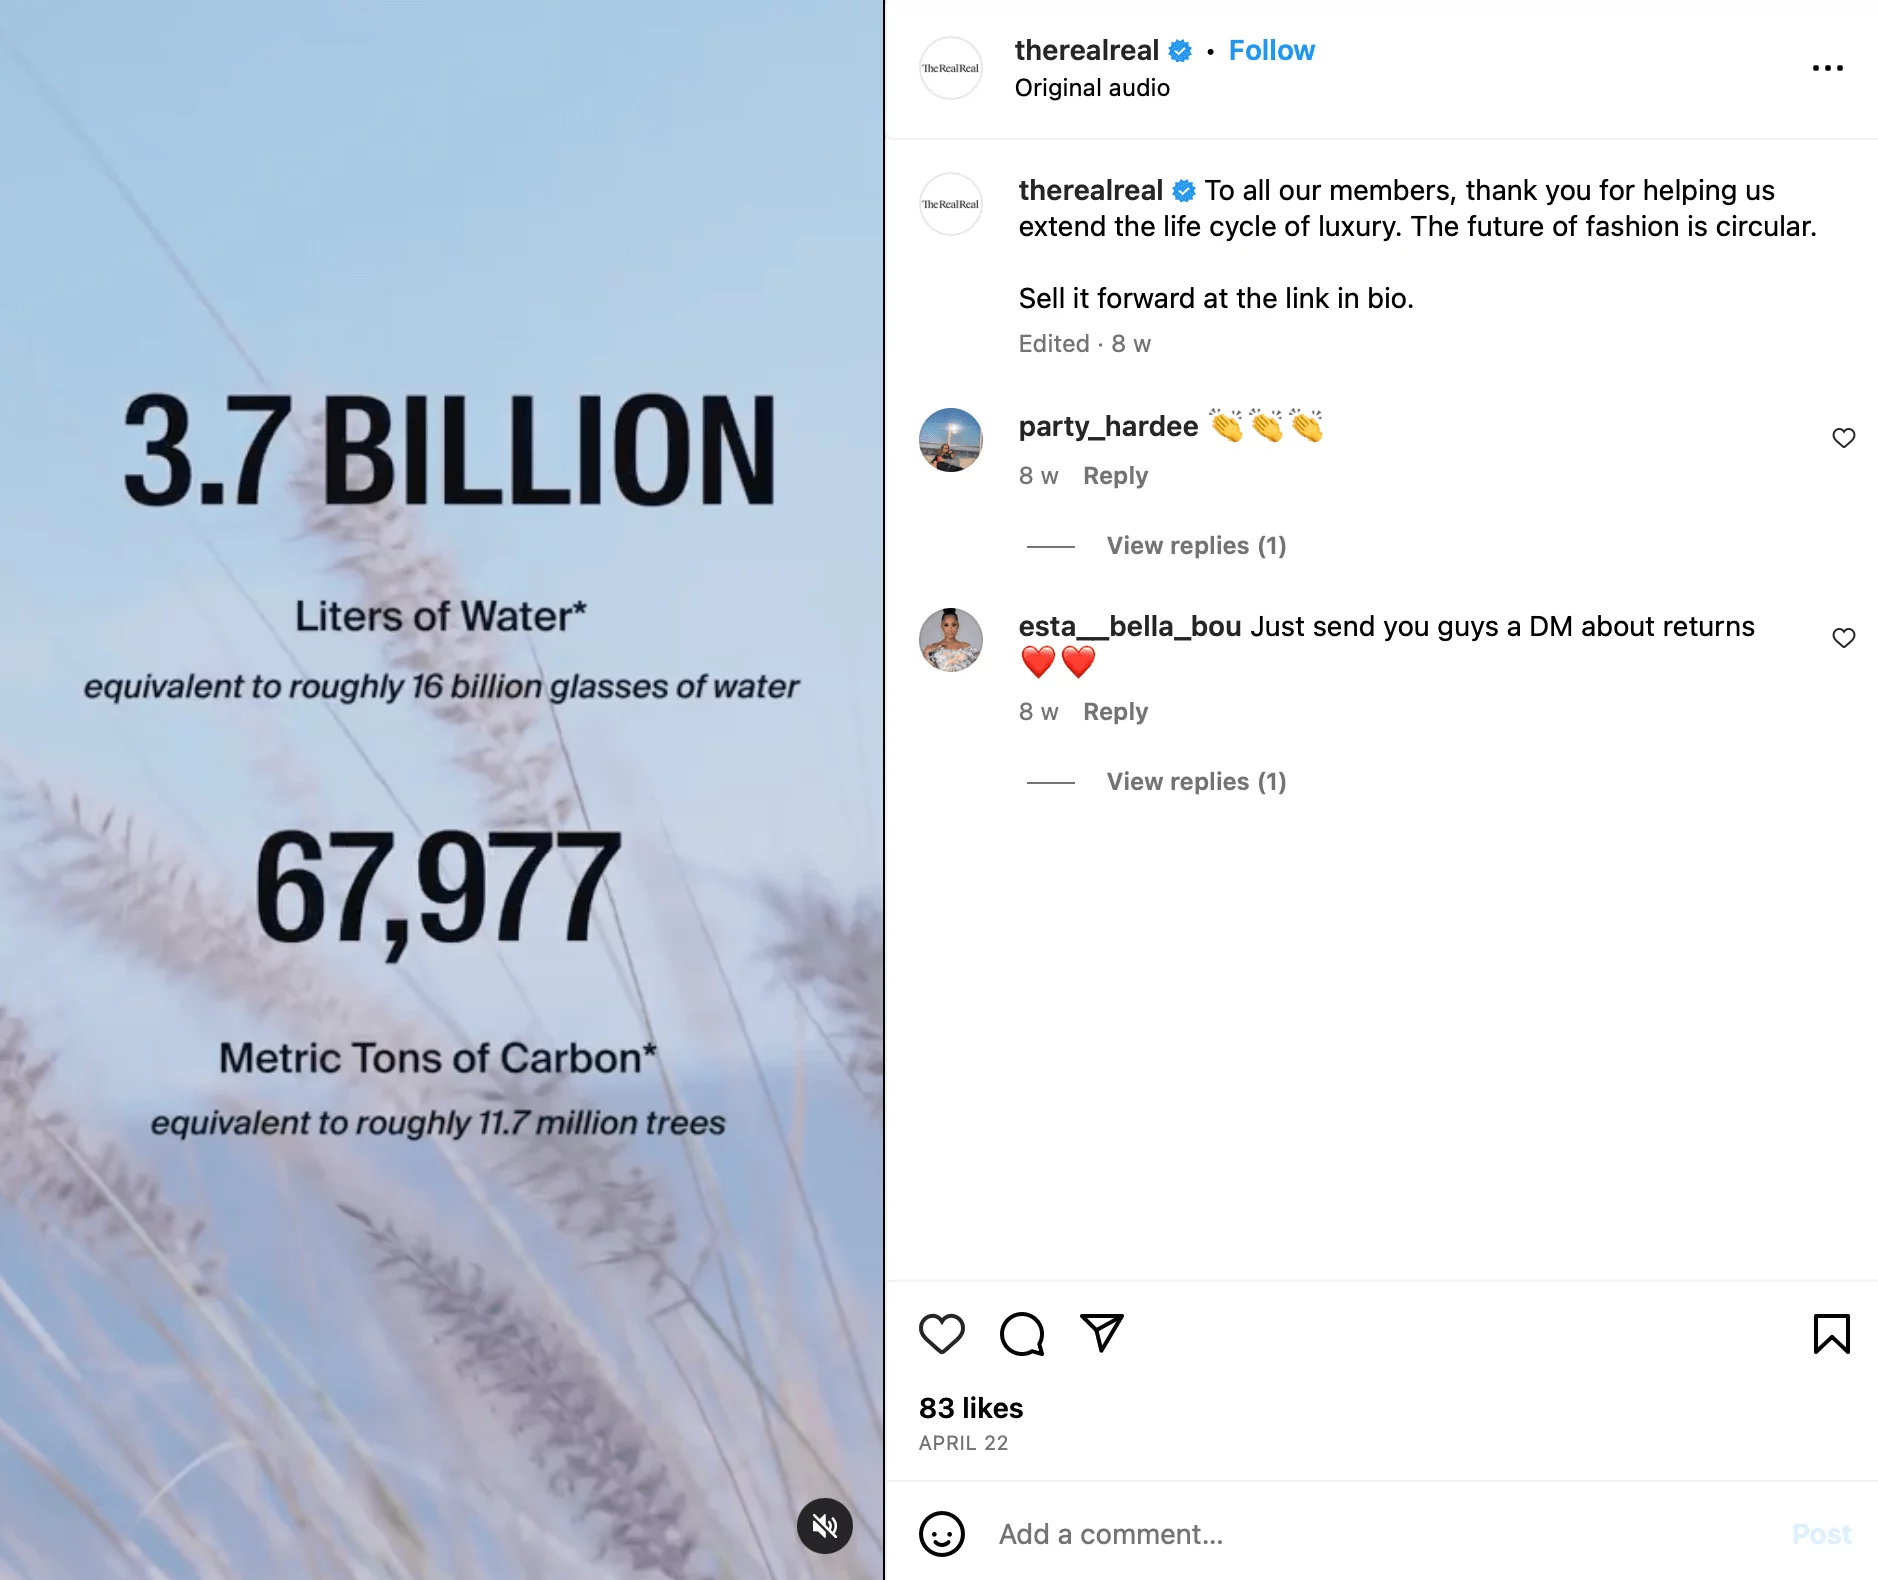 @therealreal's Instagram share showing a serene nature background with numbers showing 3.7 billion of litters of water and 67,977 metric tons of carbon.